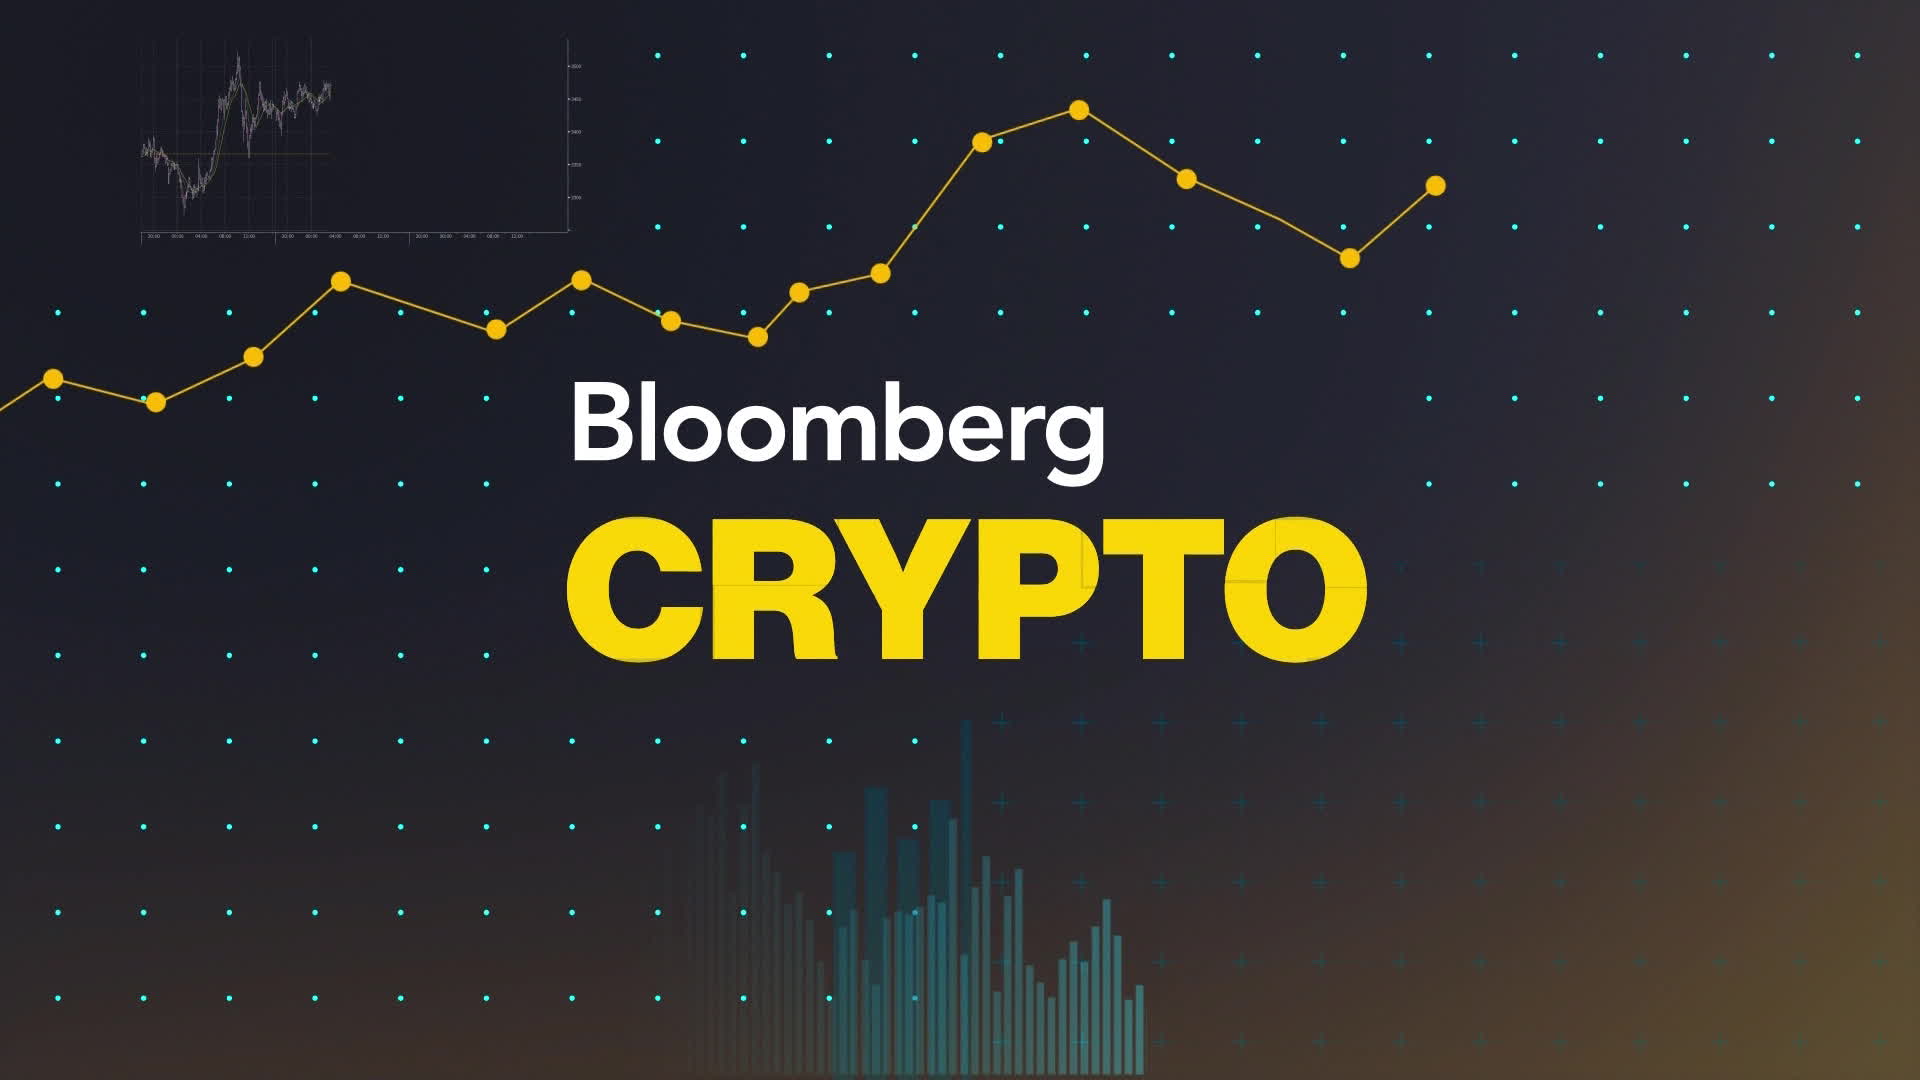 Spot Bitcoin ETF Approval Is Almost Done Deal, Bloomberg Analysts